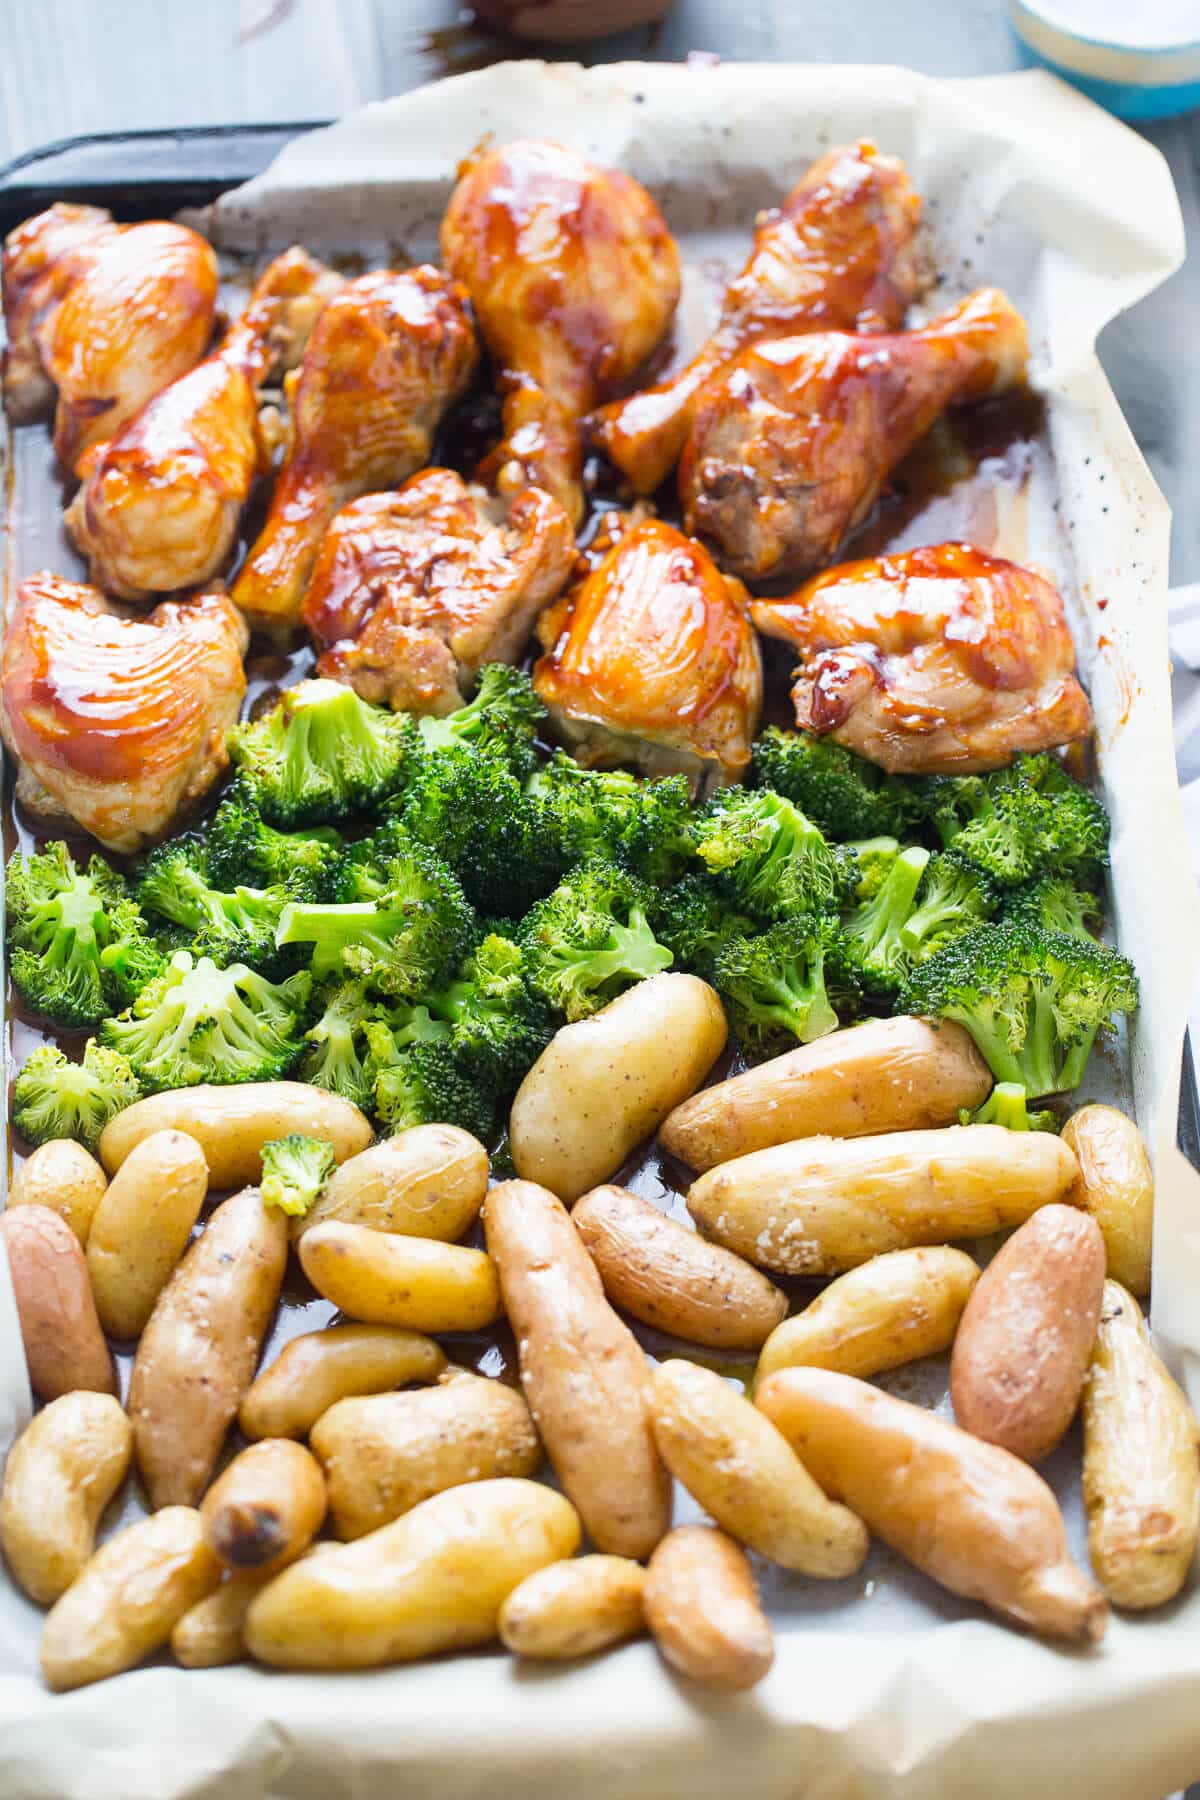 This sheet pan dinner is fantastic! This bourbon chicken recipe is baked with potatoes and broccoli then basted with a bourbon glaze!